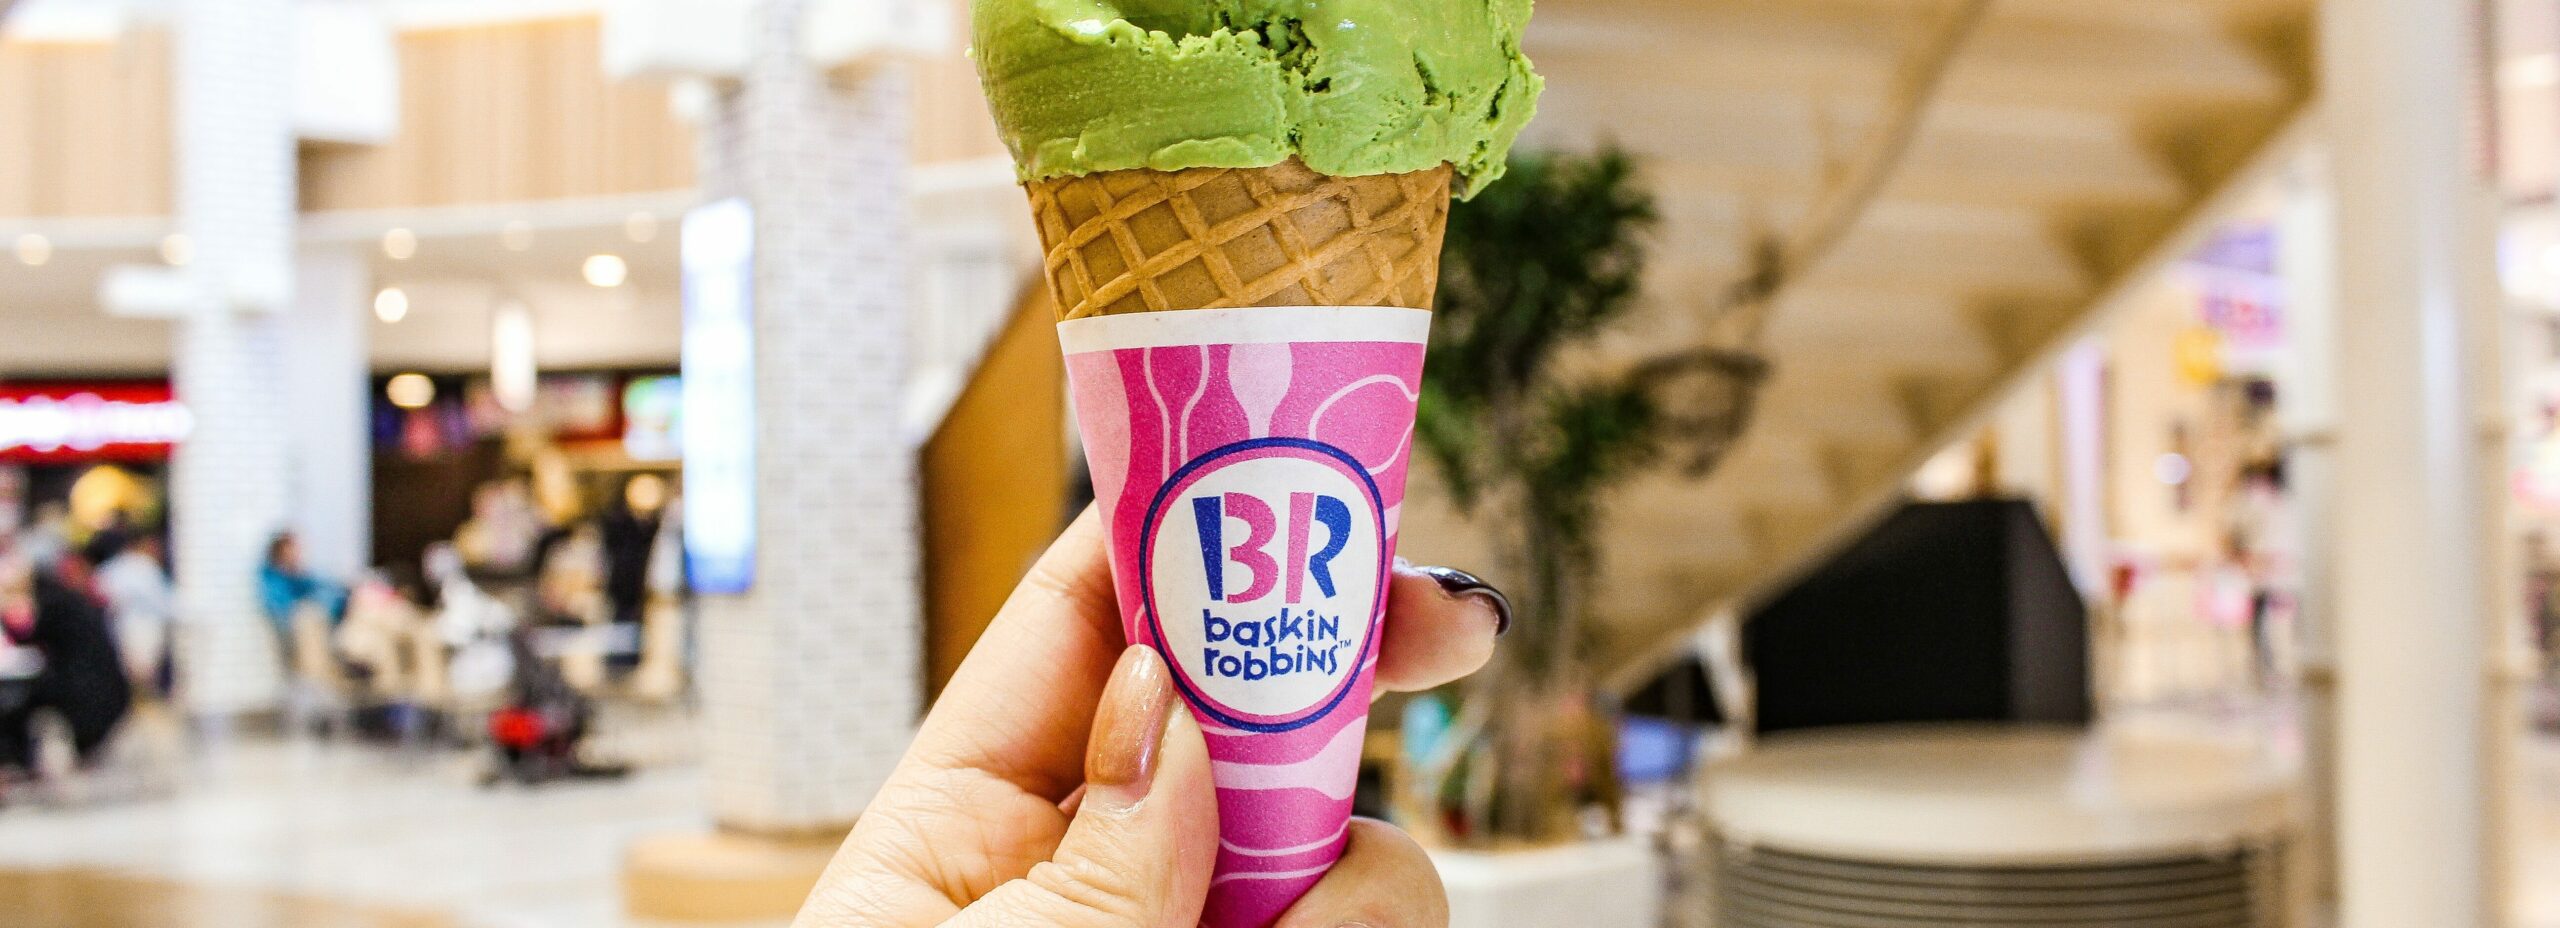 Can A 15-Year-Old Work At Baskin Robbins In California?